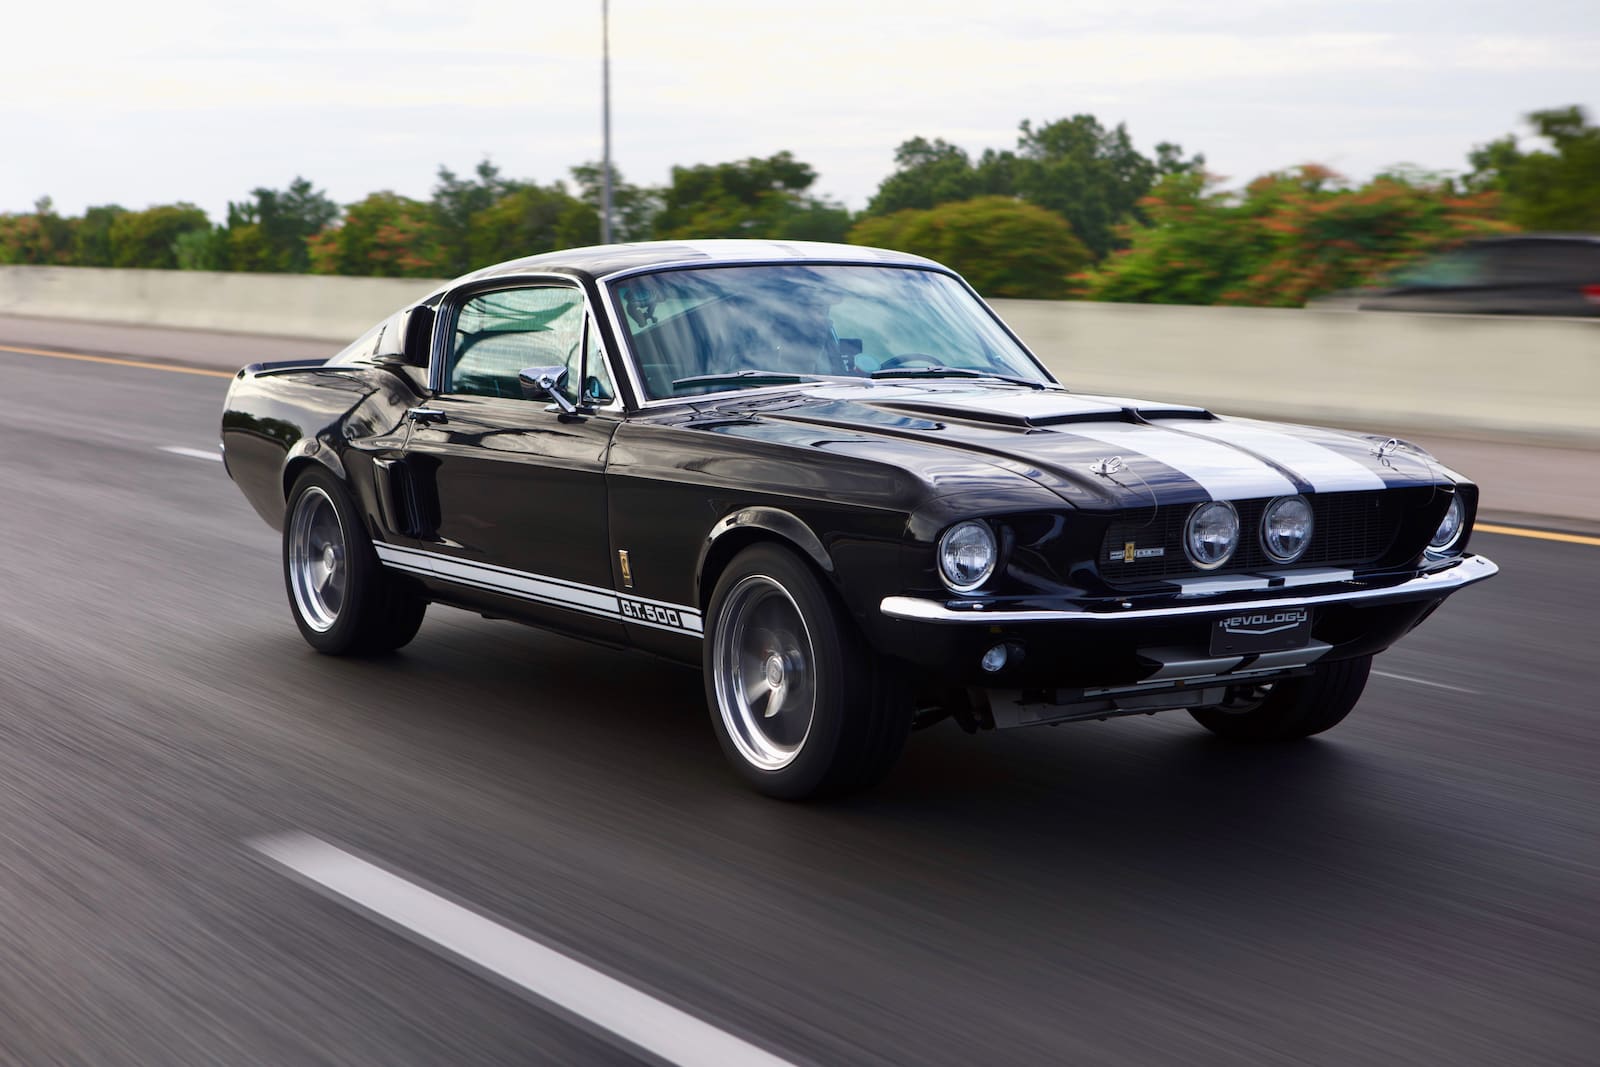 Hit the road right now with a Certified Pre-Owned Revology Mustang or ...